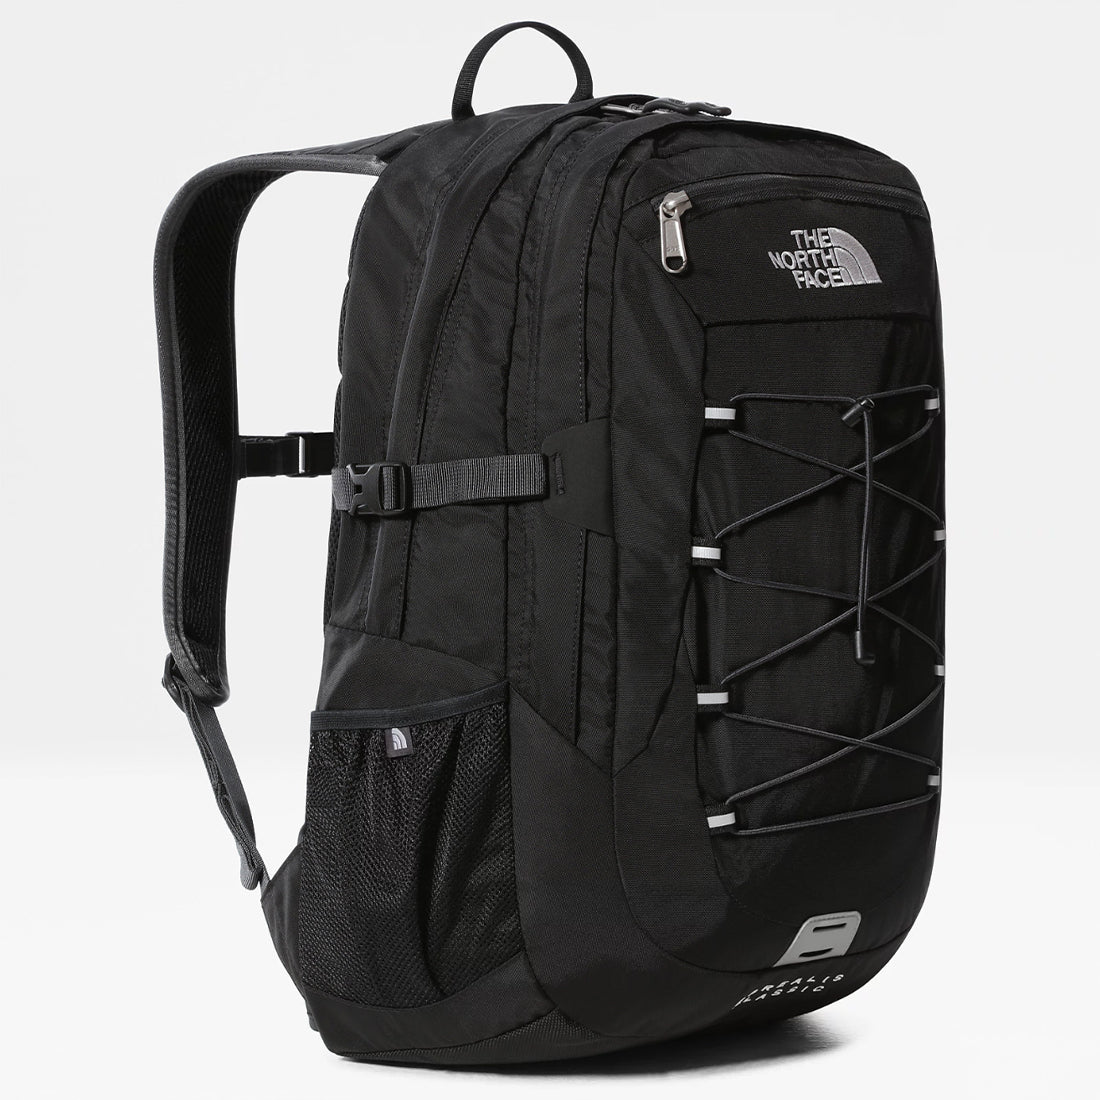 The north Face backpack - Borealis Classic - Black